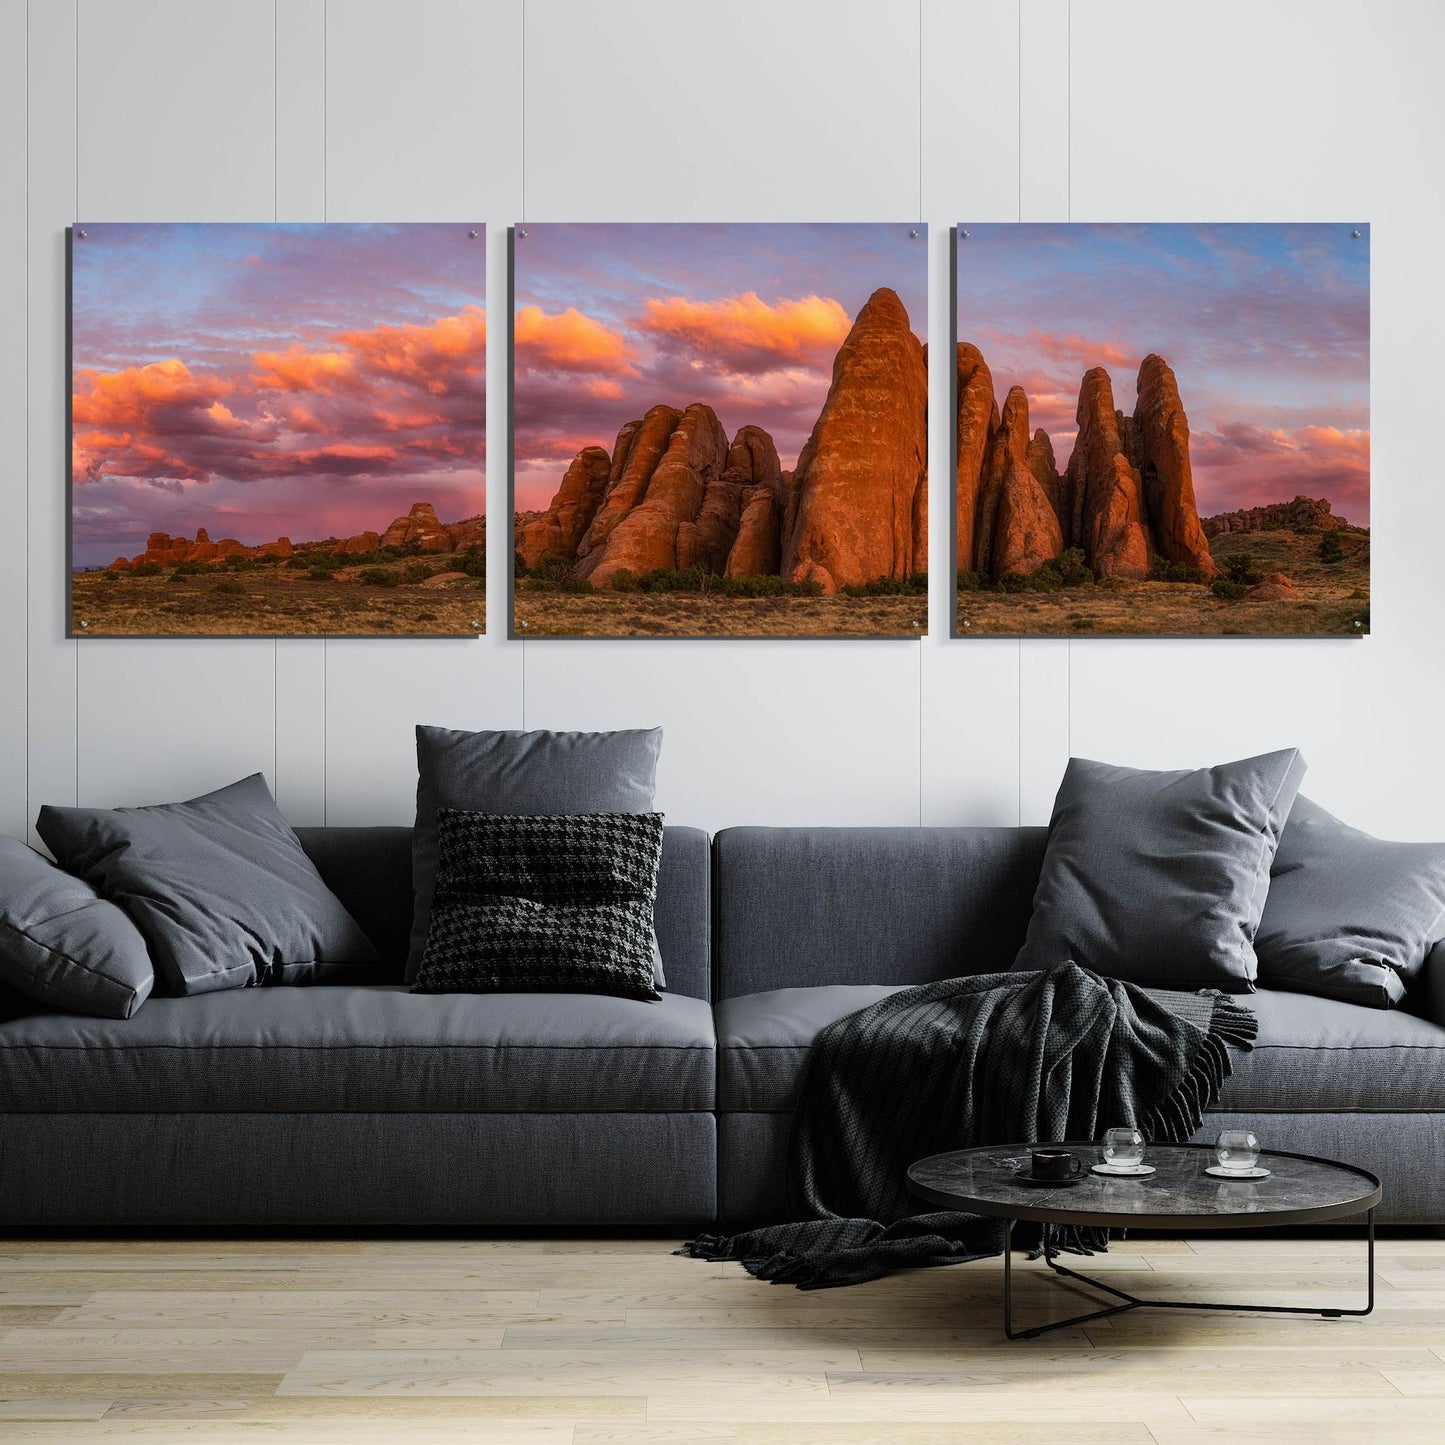 Epic Art 'Sunset at the Fins - Arches National Park' by Darren White, Acrylic Glass Wall Art, 3 Piece Set,108x36